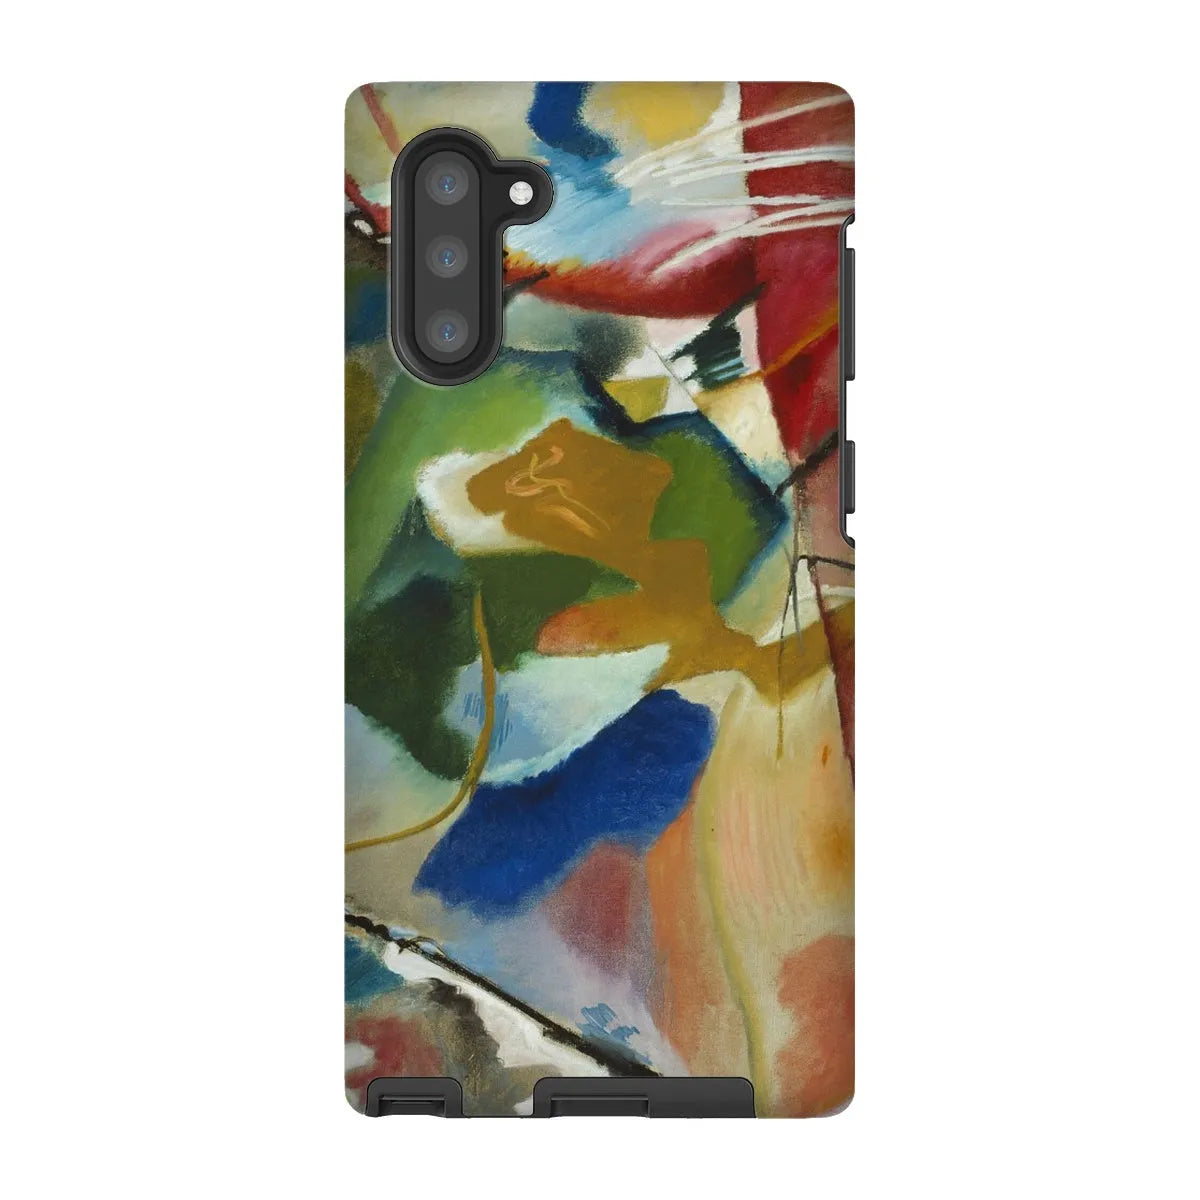 Painting With Green Center Art Phone Case - Wassily Kandinsky - Samsung Galaxy Note 10 / Matte - Mobile Phone Cases